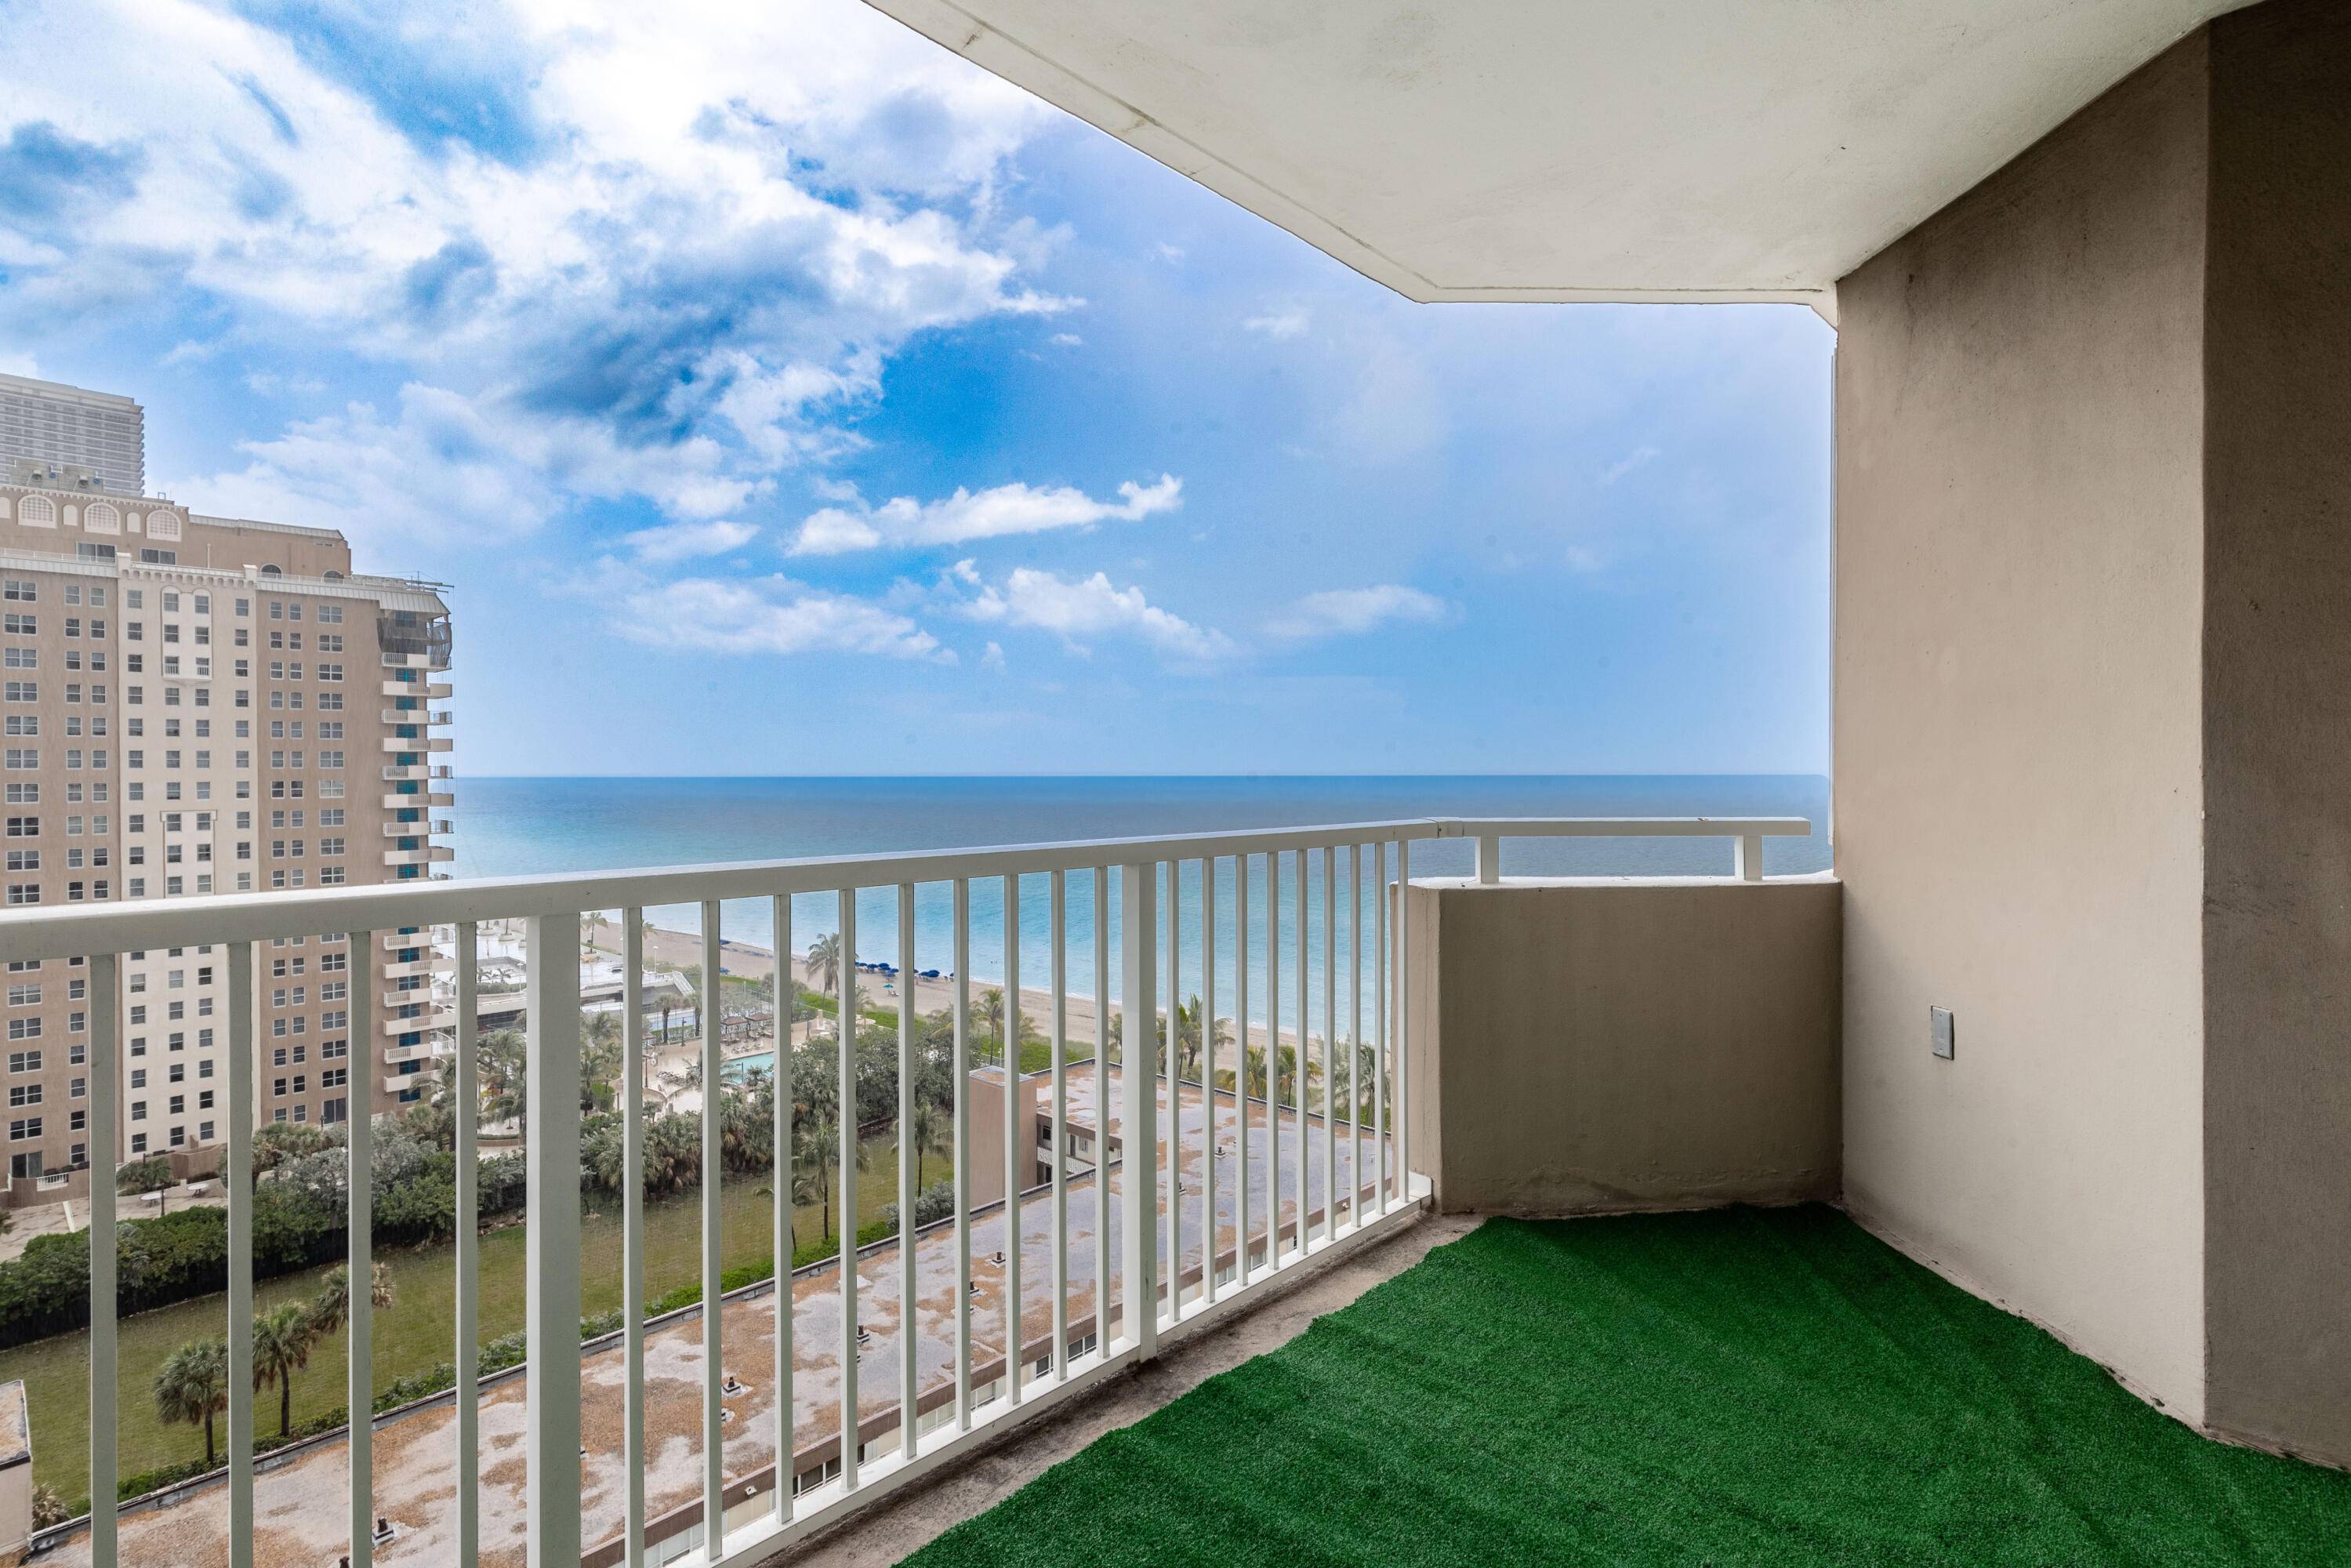 Stunning ocean views from your private balcony in this lovely one bedroom one and half bath condo unit in the highly sought after Hemisphere Condo.